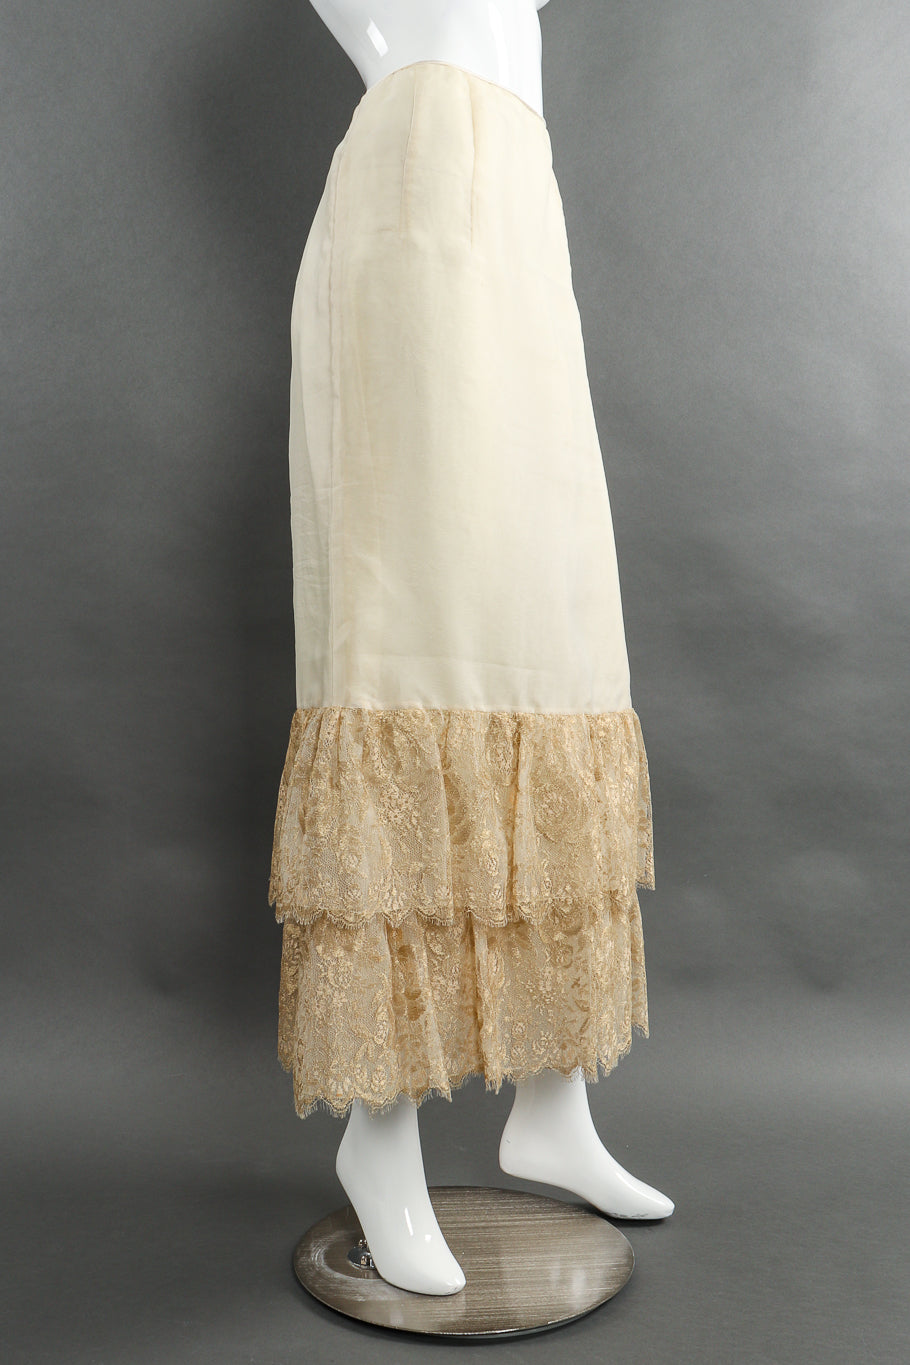 Vintage Mary McFadden Tiered Lace Mermaid Skirt side view on mannequin @Recessla